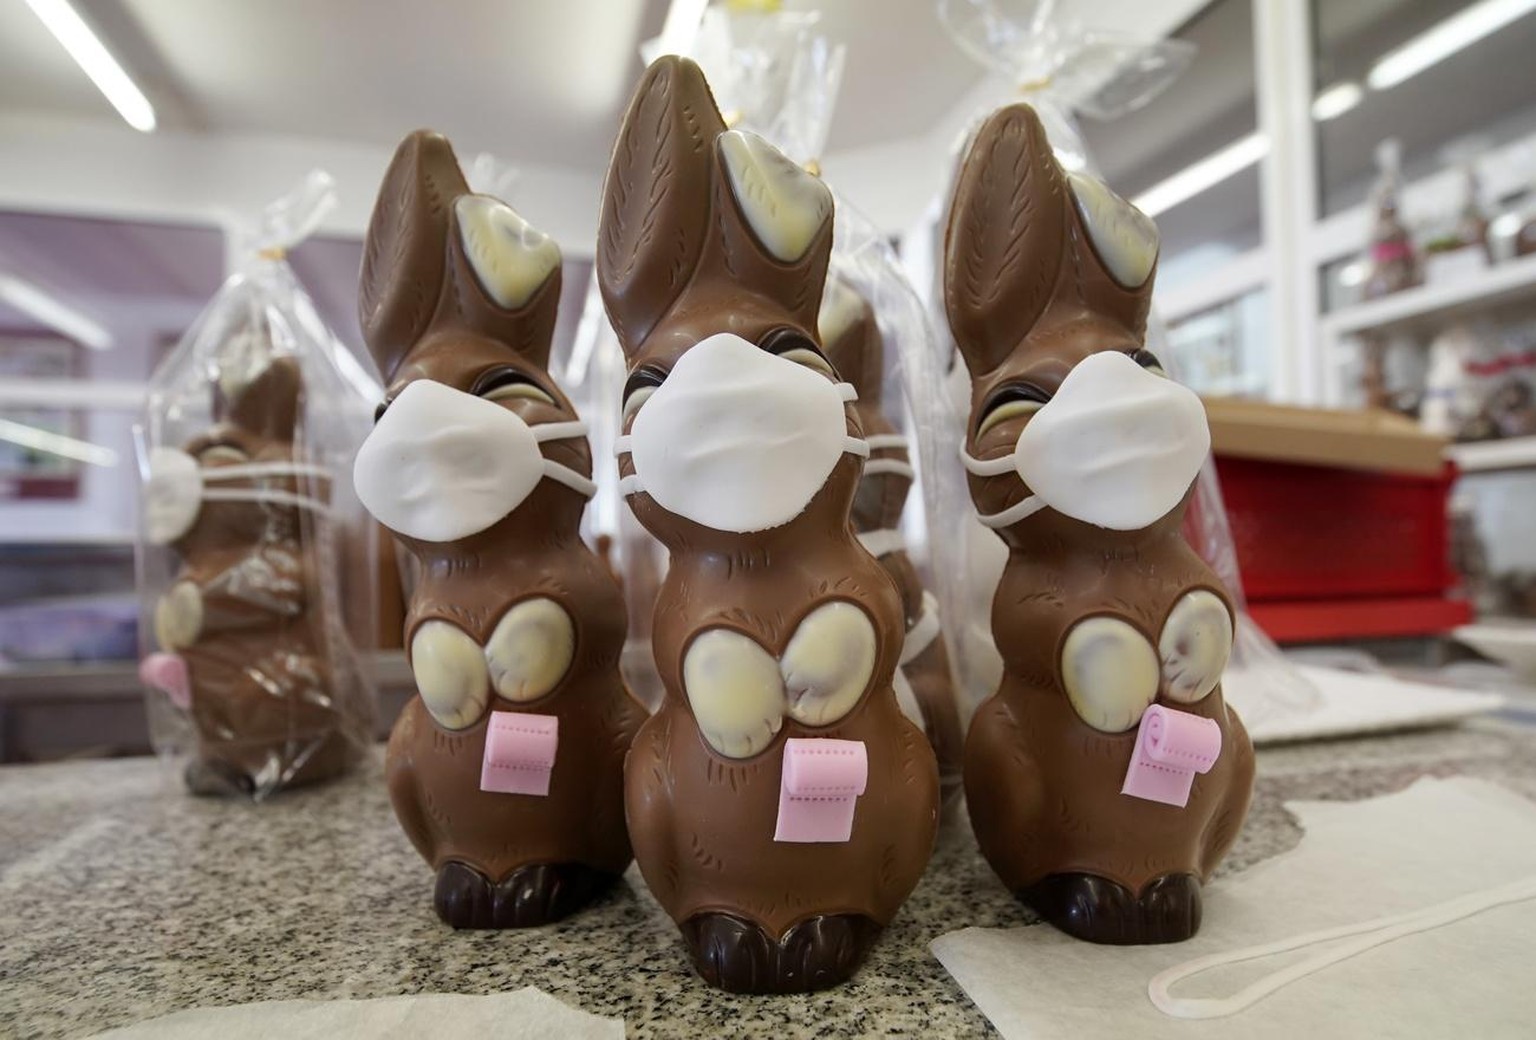 epa08350051 A view of chocolate Easter bunnies with mouth masks during the production at the Wawi company in Pirmasens, Germany, 08 April 2020. WAWI-Schokolade AG is a German company in the confection ...